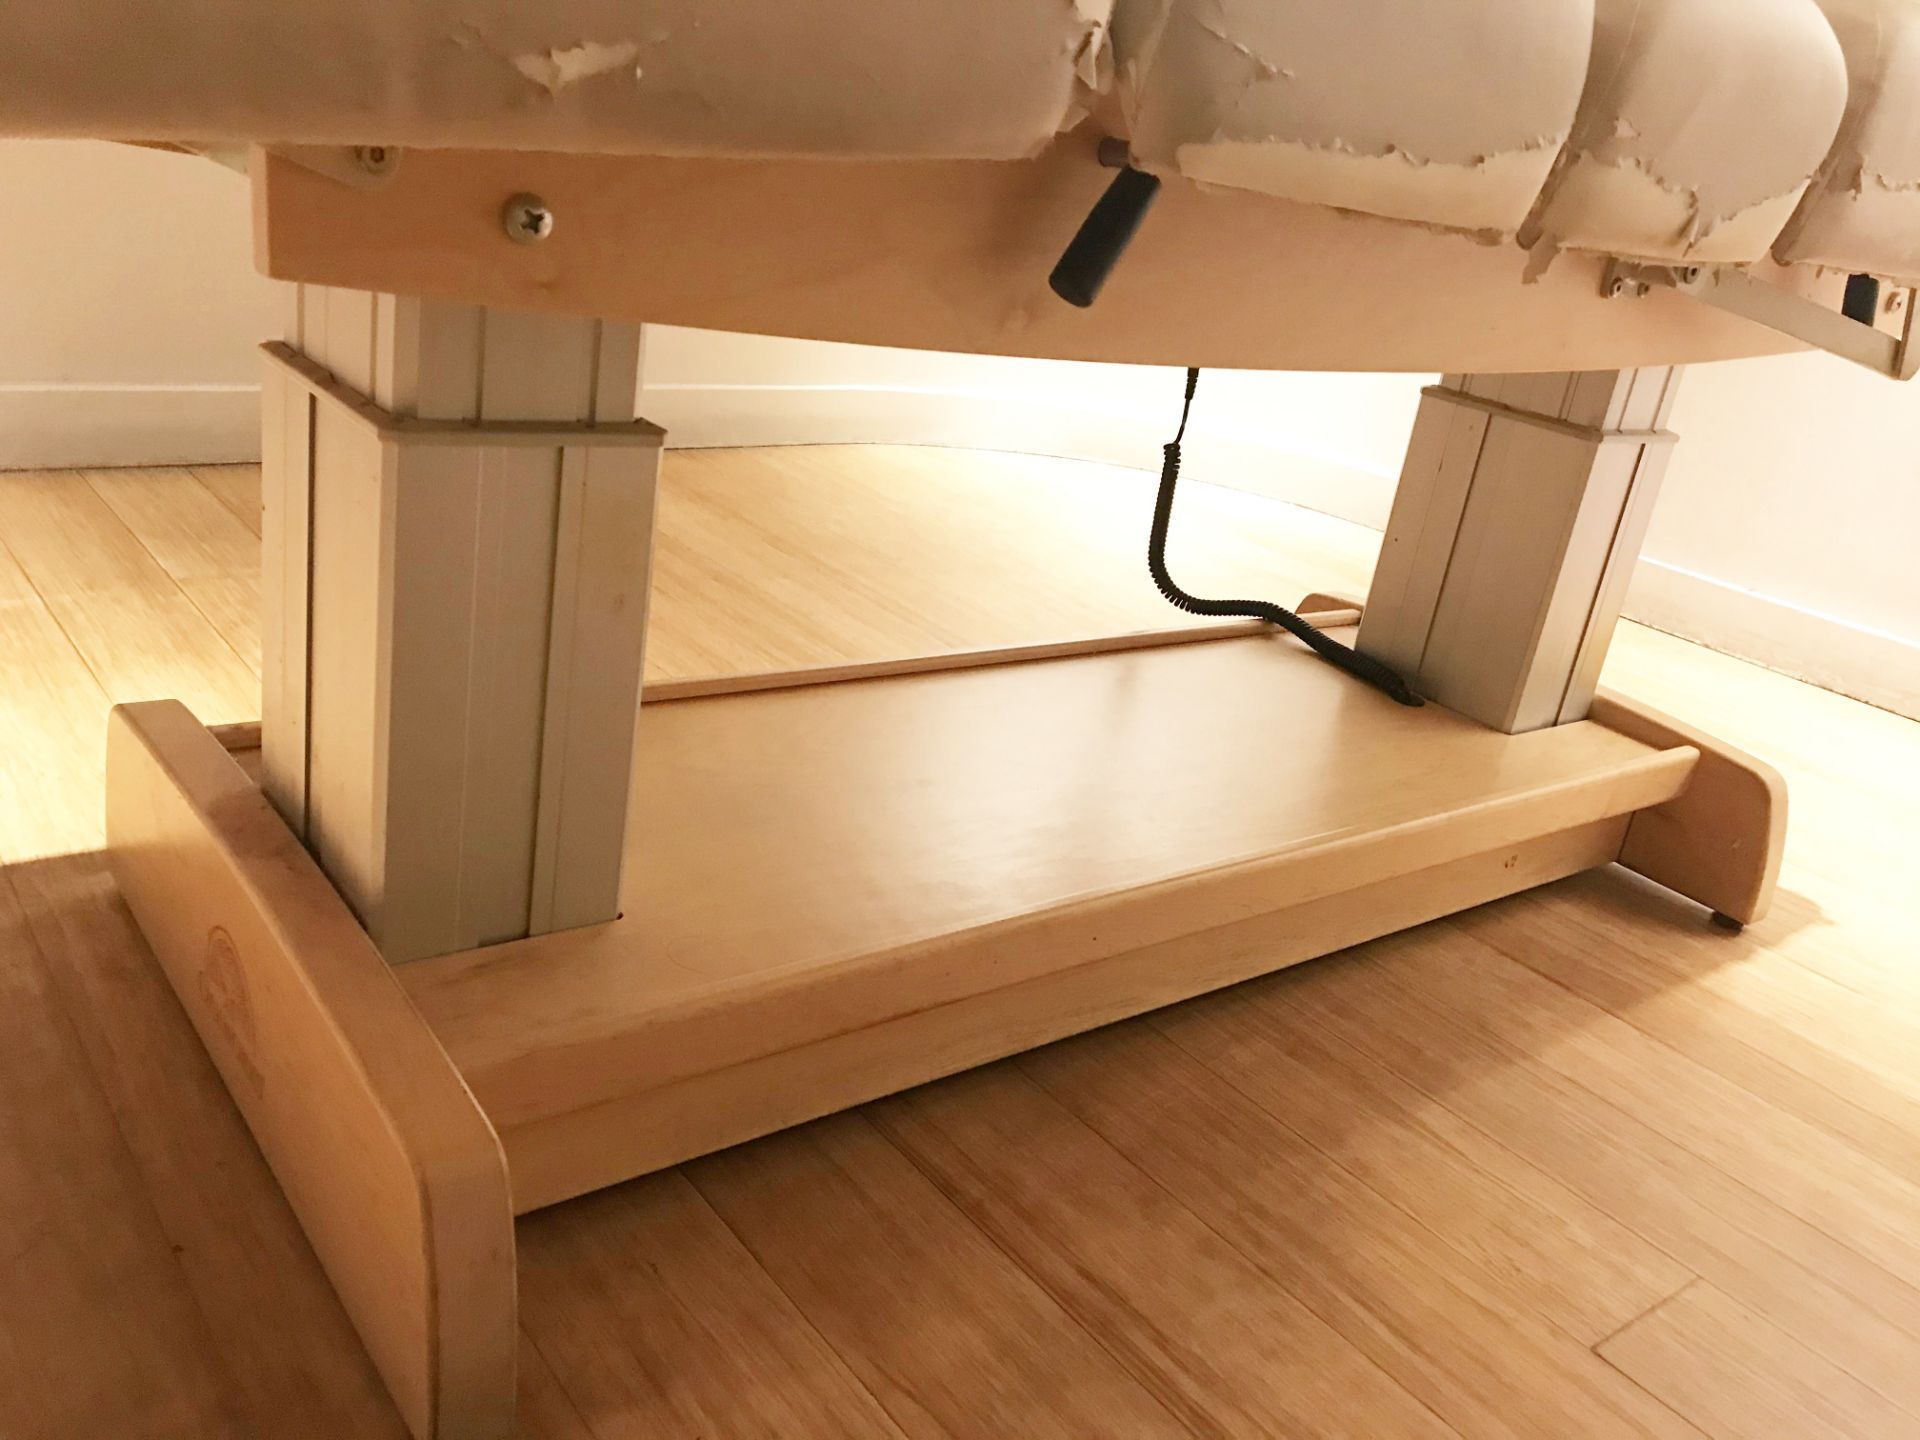 2 x Oakworks Clinician Electric-Hydraulic Massage Tables With Footpedals and Linak HBWO Remote - Image 2 of 8